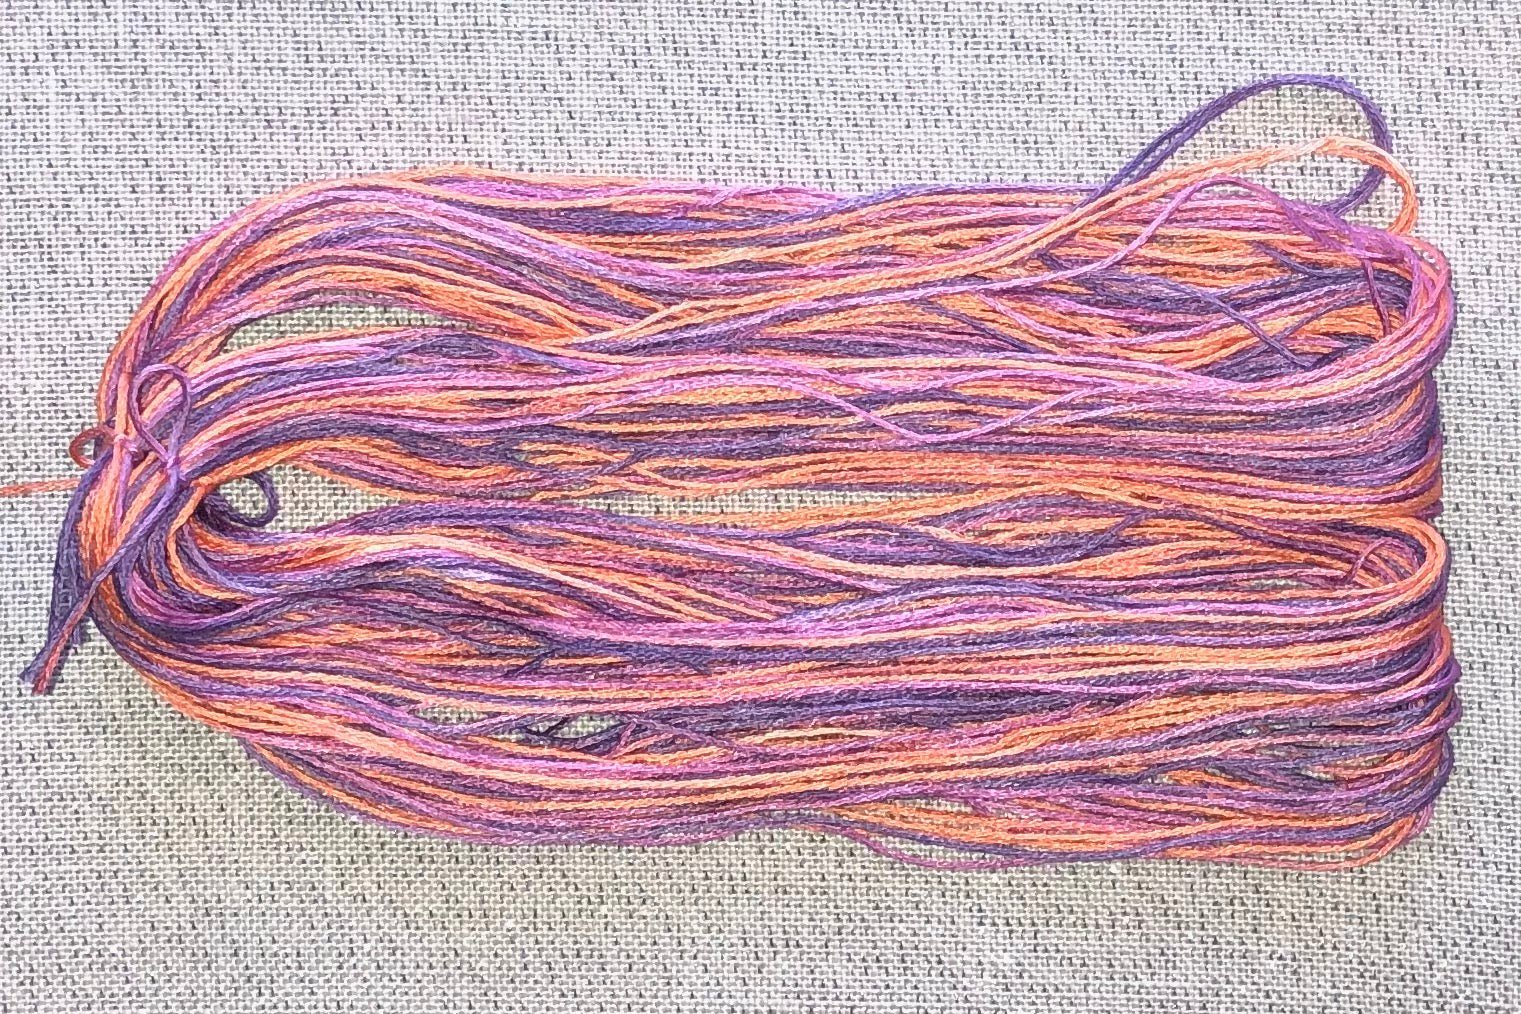 Silk hand dyed floss - Snapdragons - Dyeing for Cross Stitch